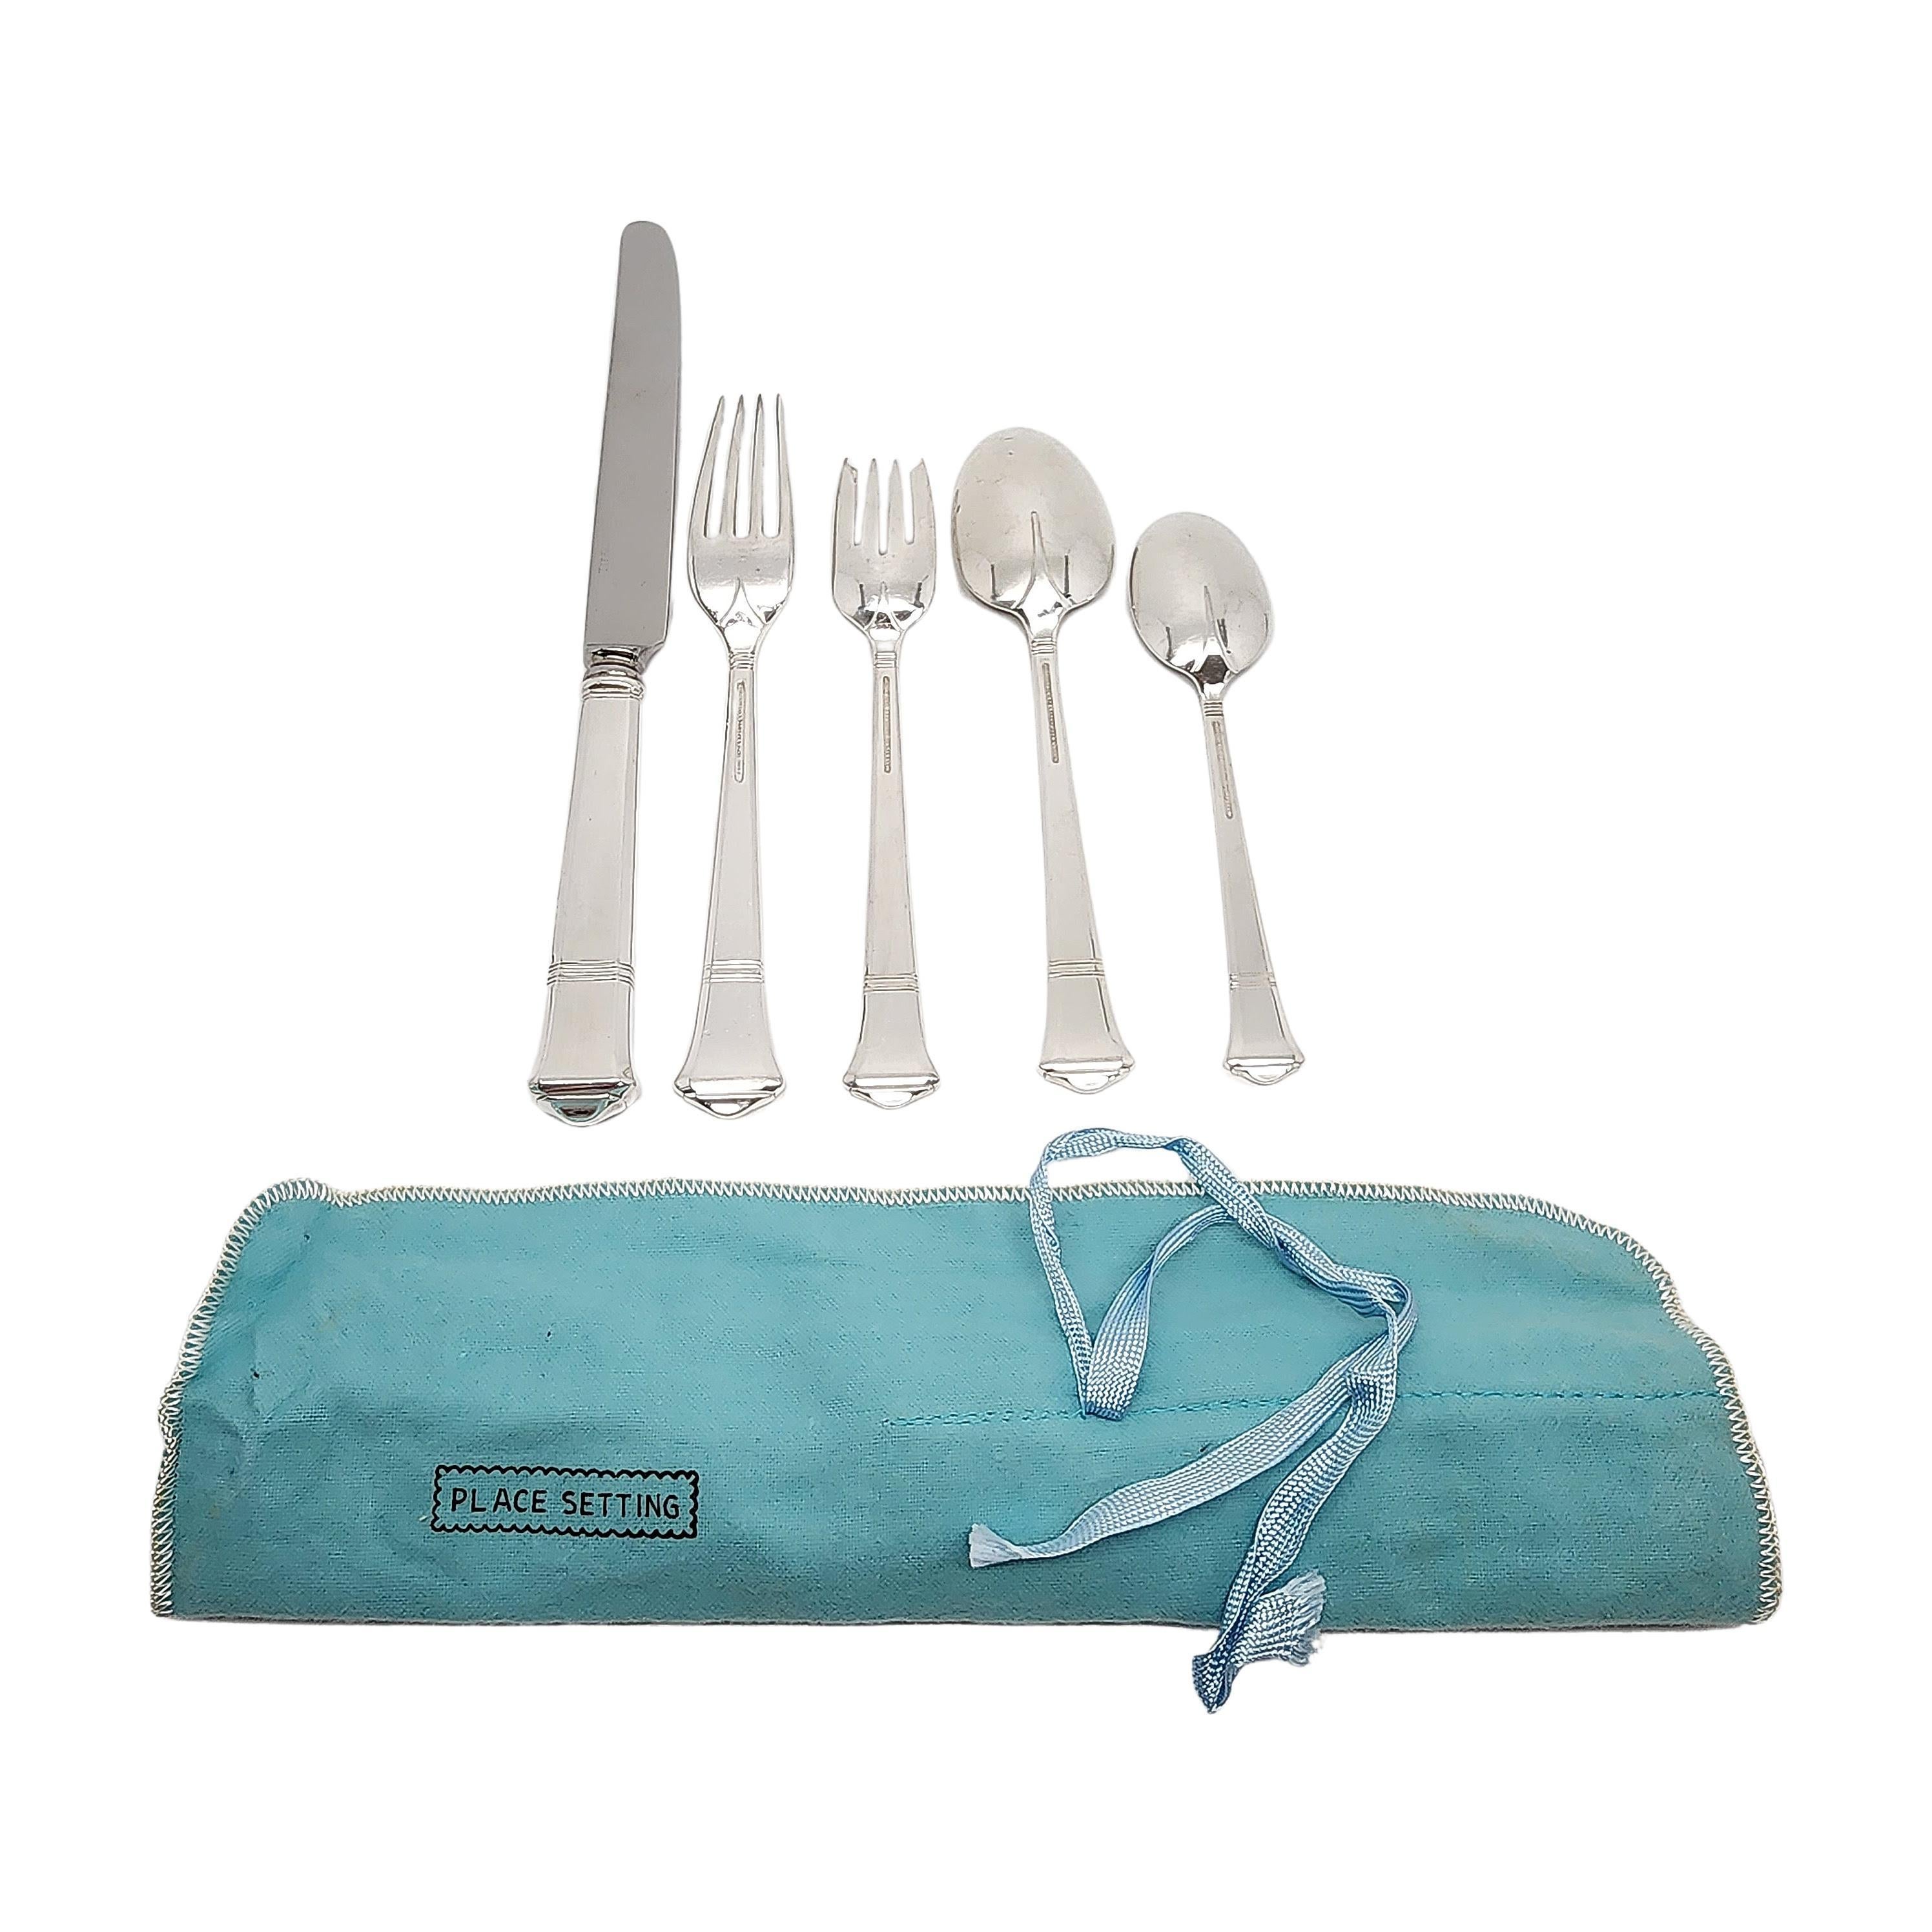 5pc dinner place setting by Tiffany & Co in the Windham pattern with pouch.

No monogram

Beautiful 5pc dinner setting includes knife, dinner fork, salad fork, place/oval soup spoon and teaspoon. Tiffany's Windham pattern was designed by Arthur